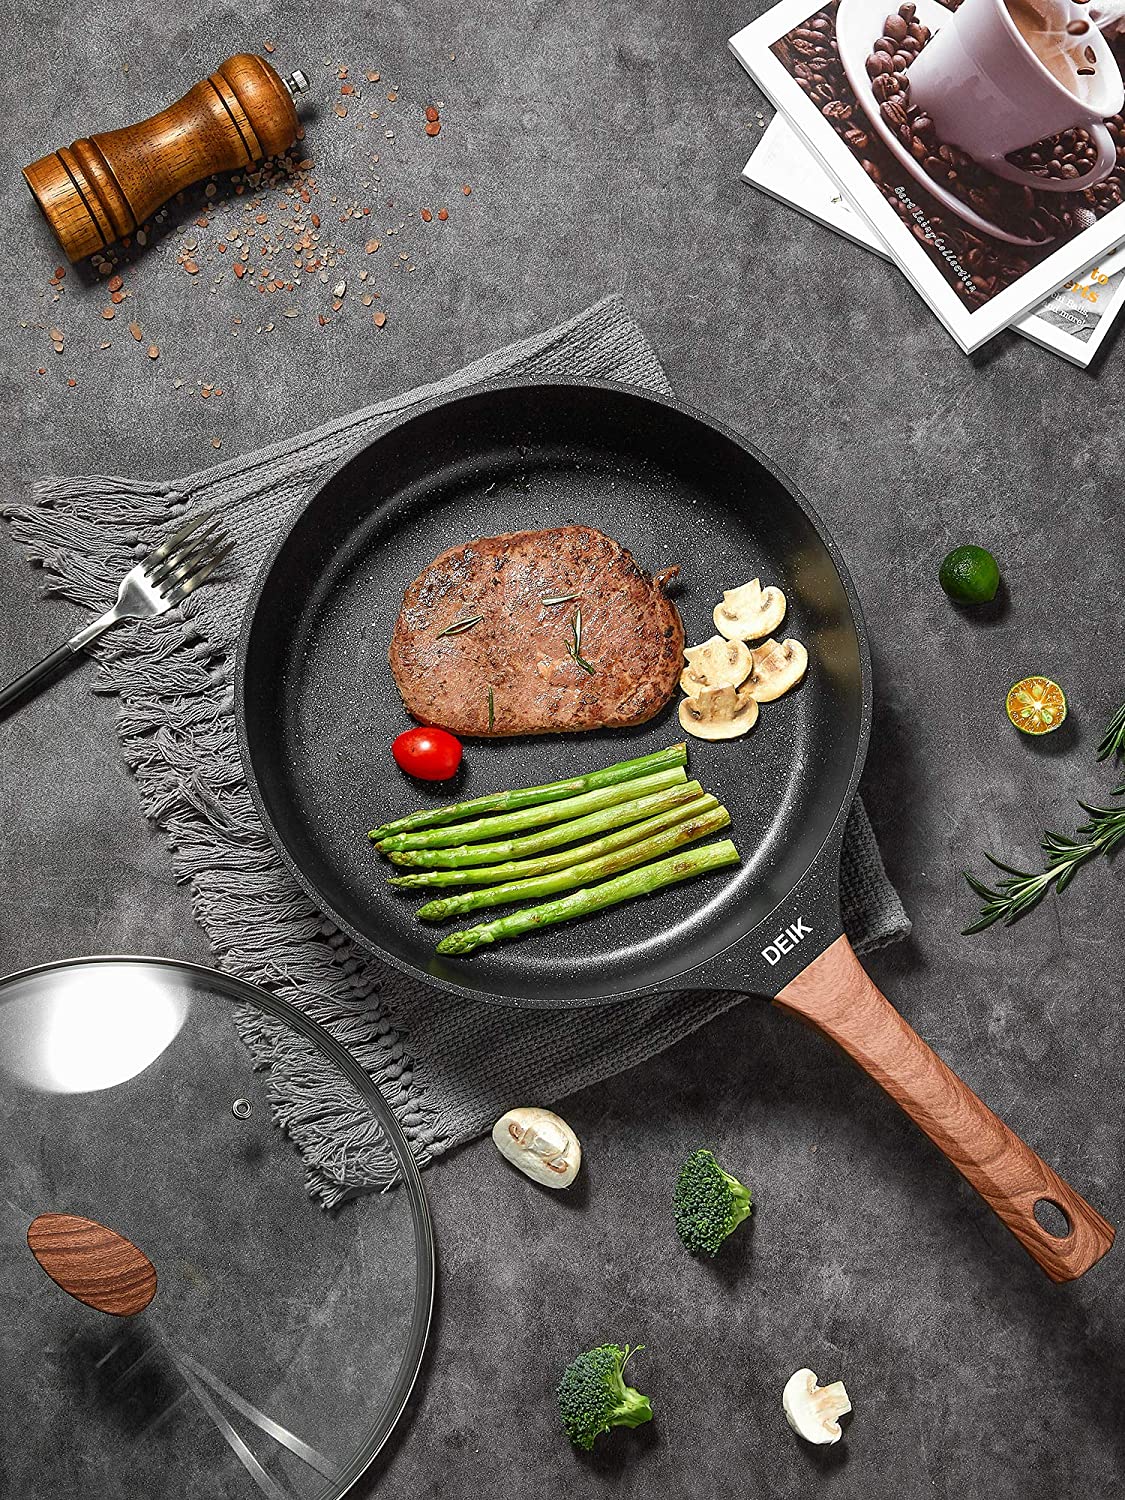 DEIK Frying Pan with Lid, Non-Stick Frying Pan 28 cm, Saute Pan with Black Granite-Derived Coating, Die-cast Aluminium, Bakelite Handle, All Stoves Compatible